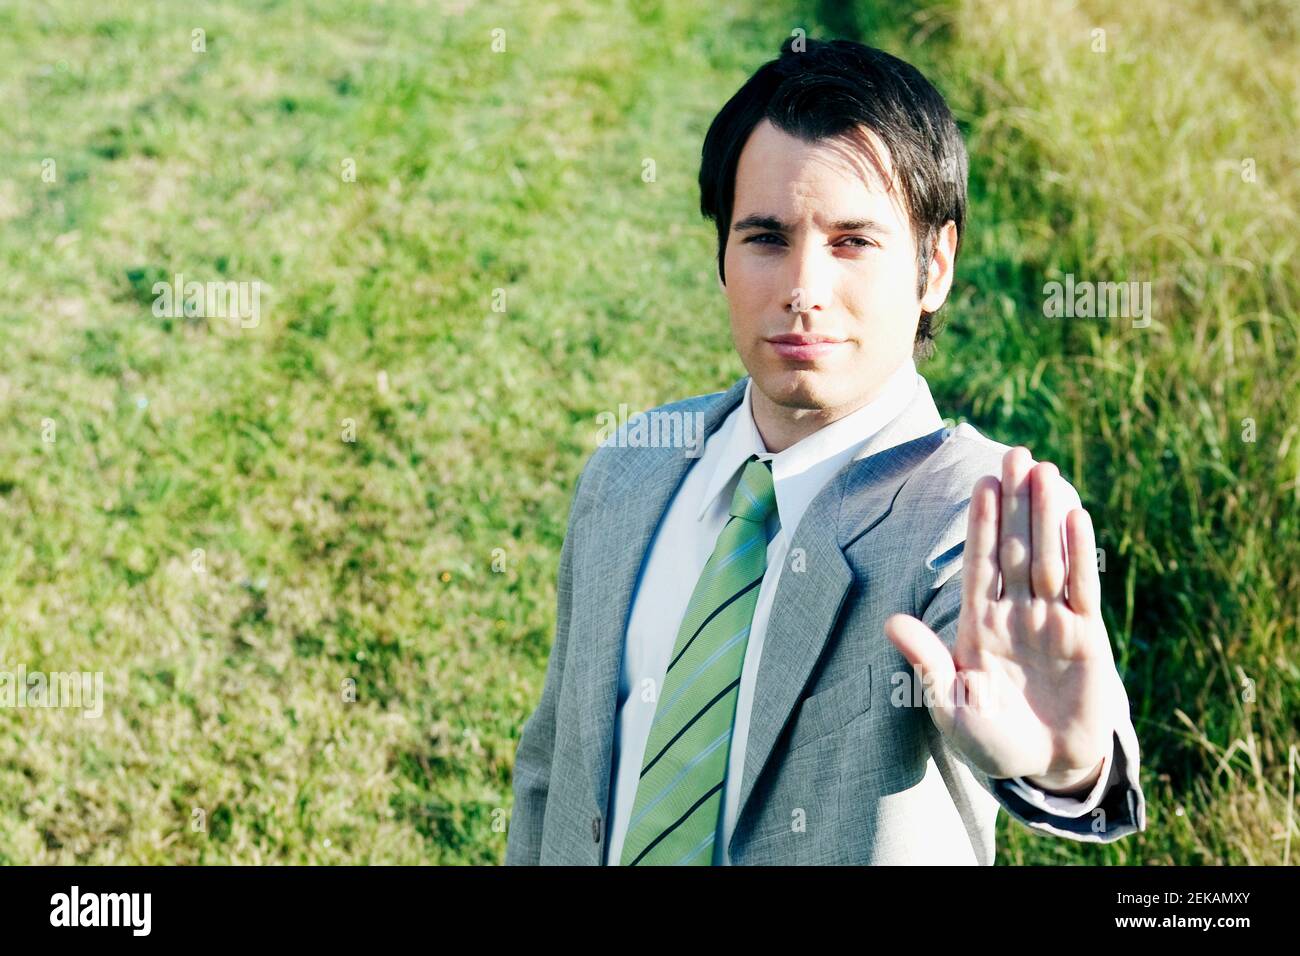 Businessman showing Stop gesture Stock Photo